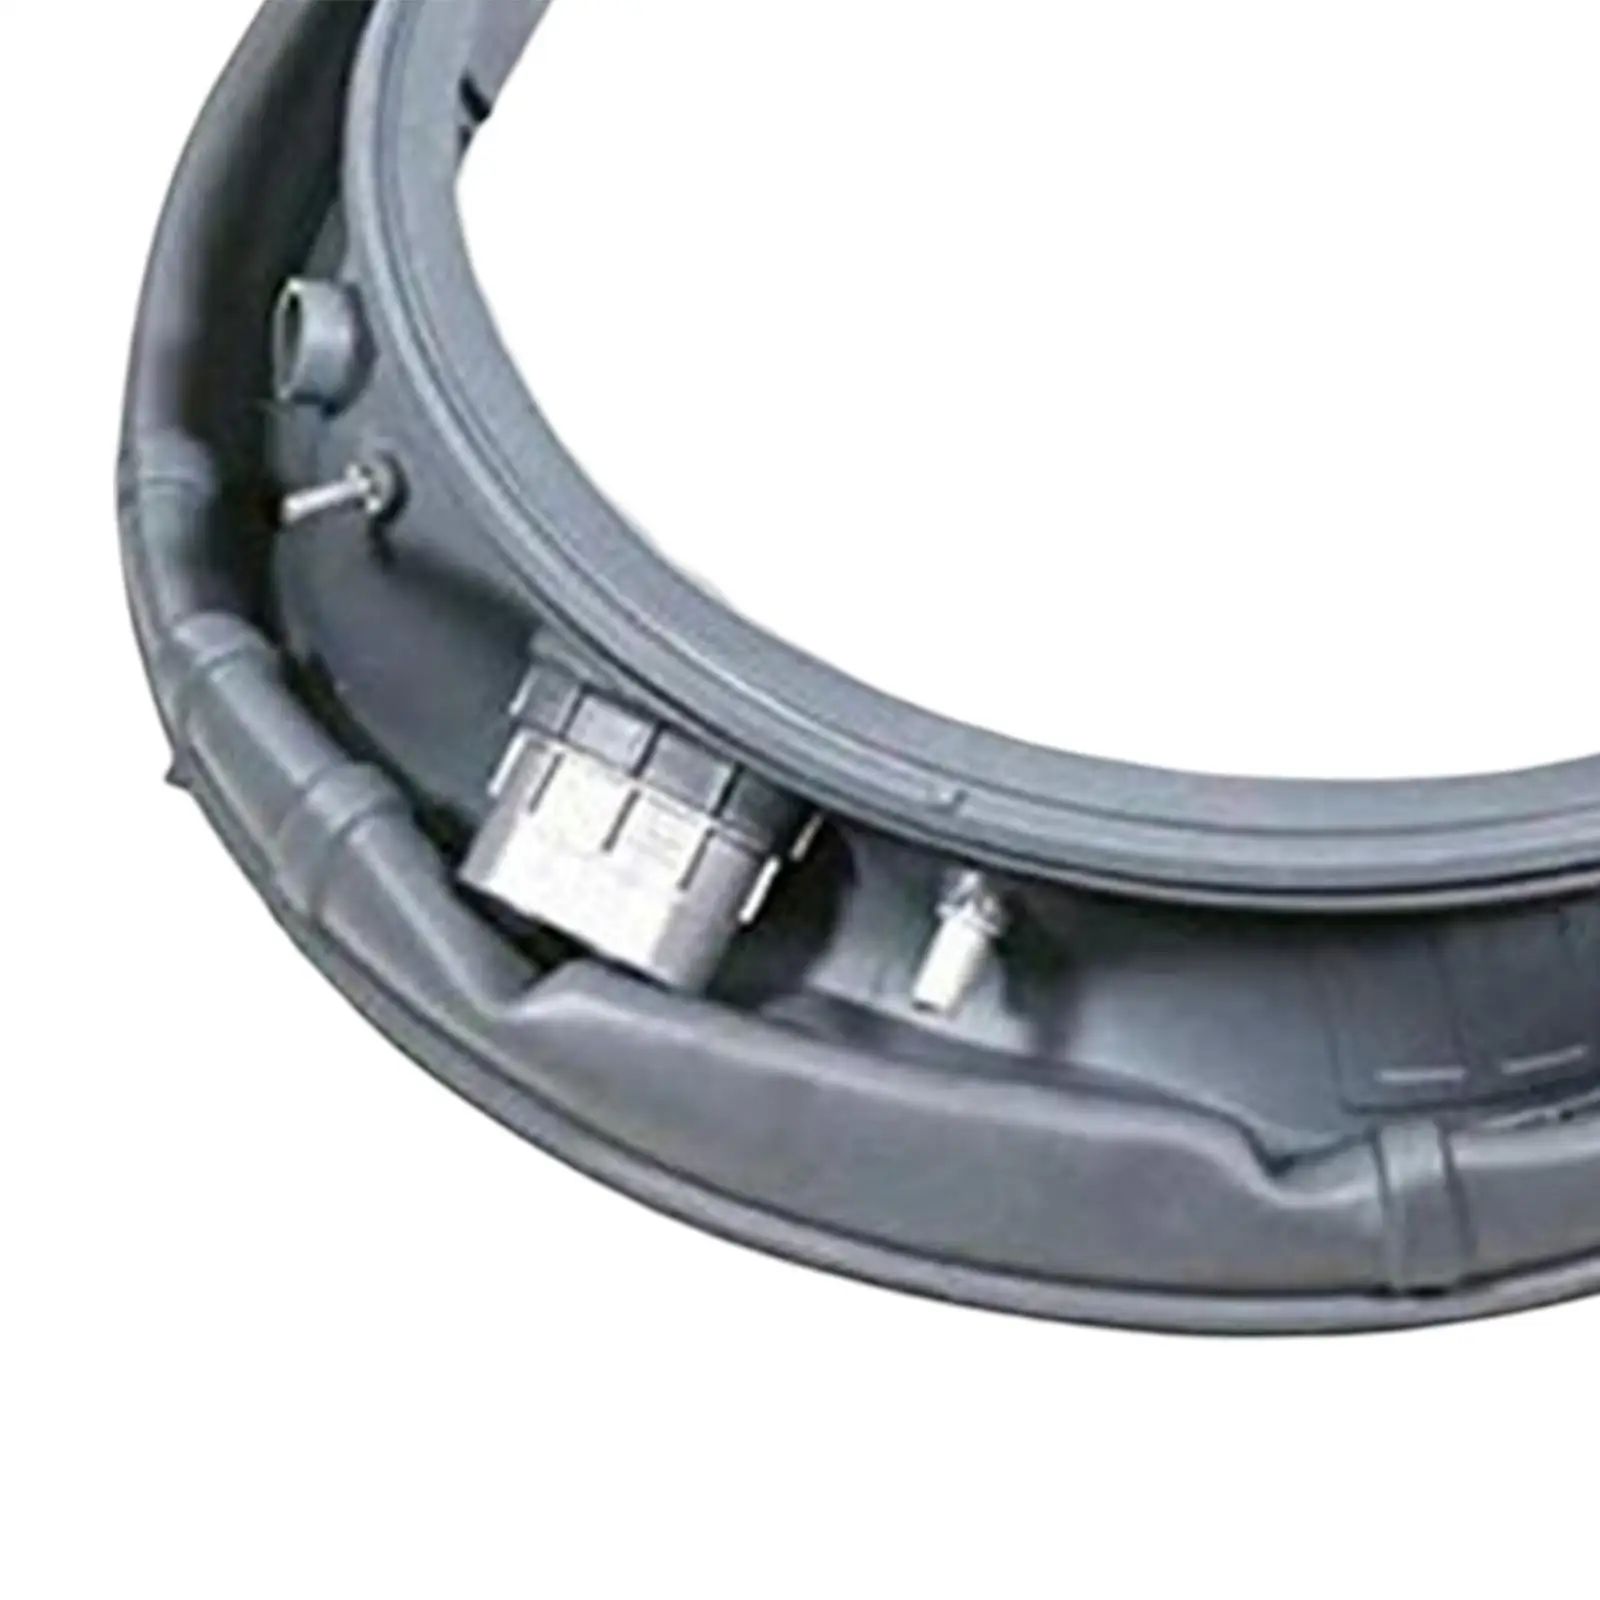 Round Door Boot Gasket Gum Material for Samsung Washers DC97-18094B AP5917067 Washer Repair Gray PS9606239